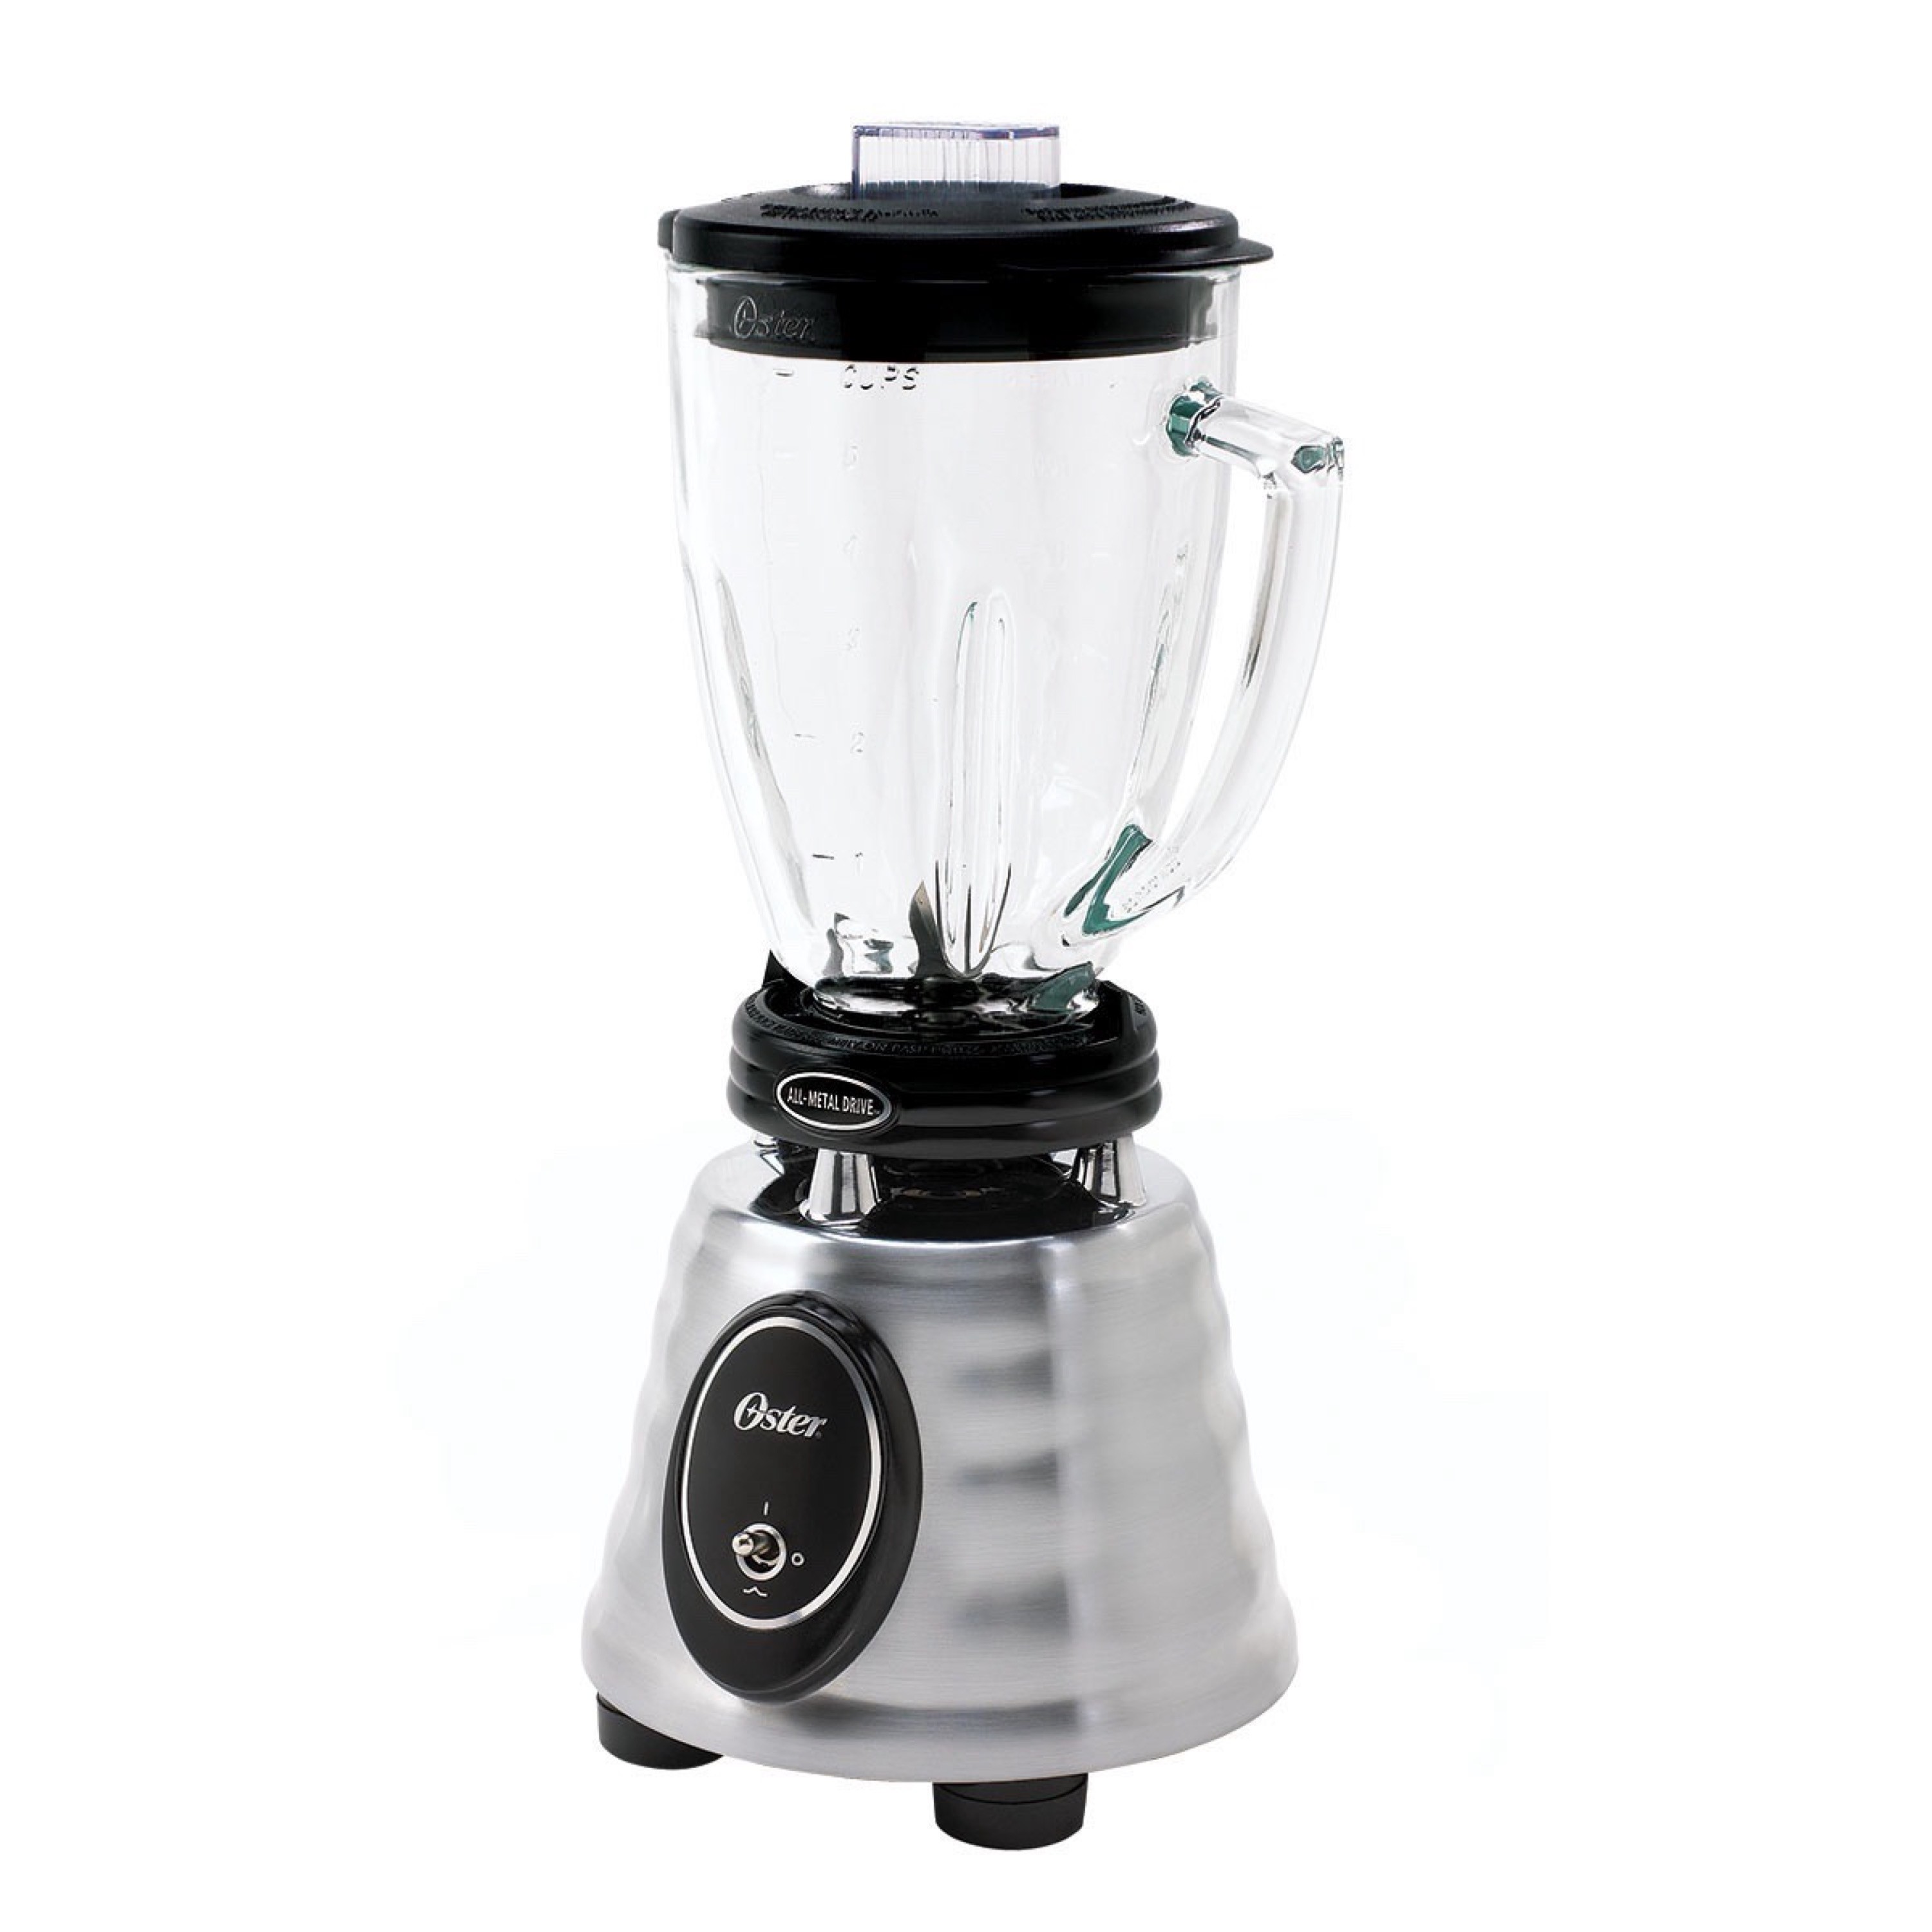 Oster® Classic Series Heritage Blender with 6-Cup Glass Jar, Stainless Steel - image 3 of 4